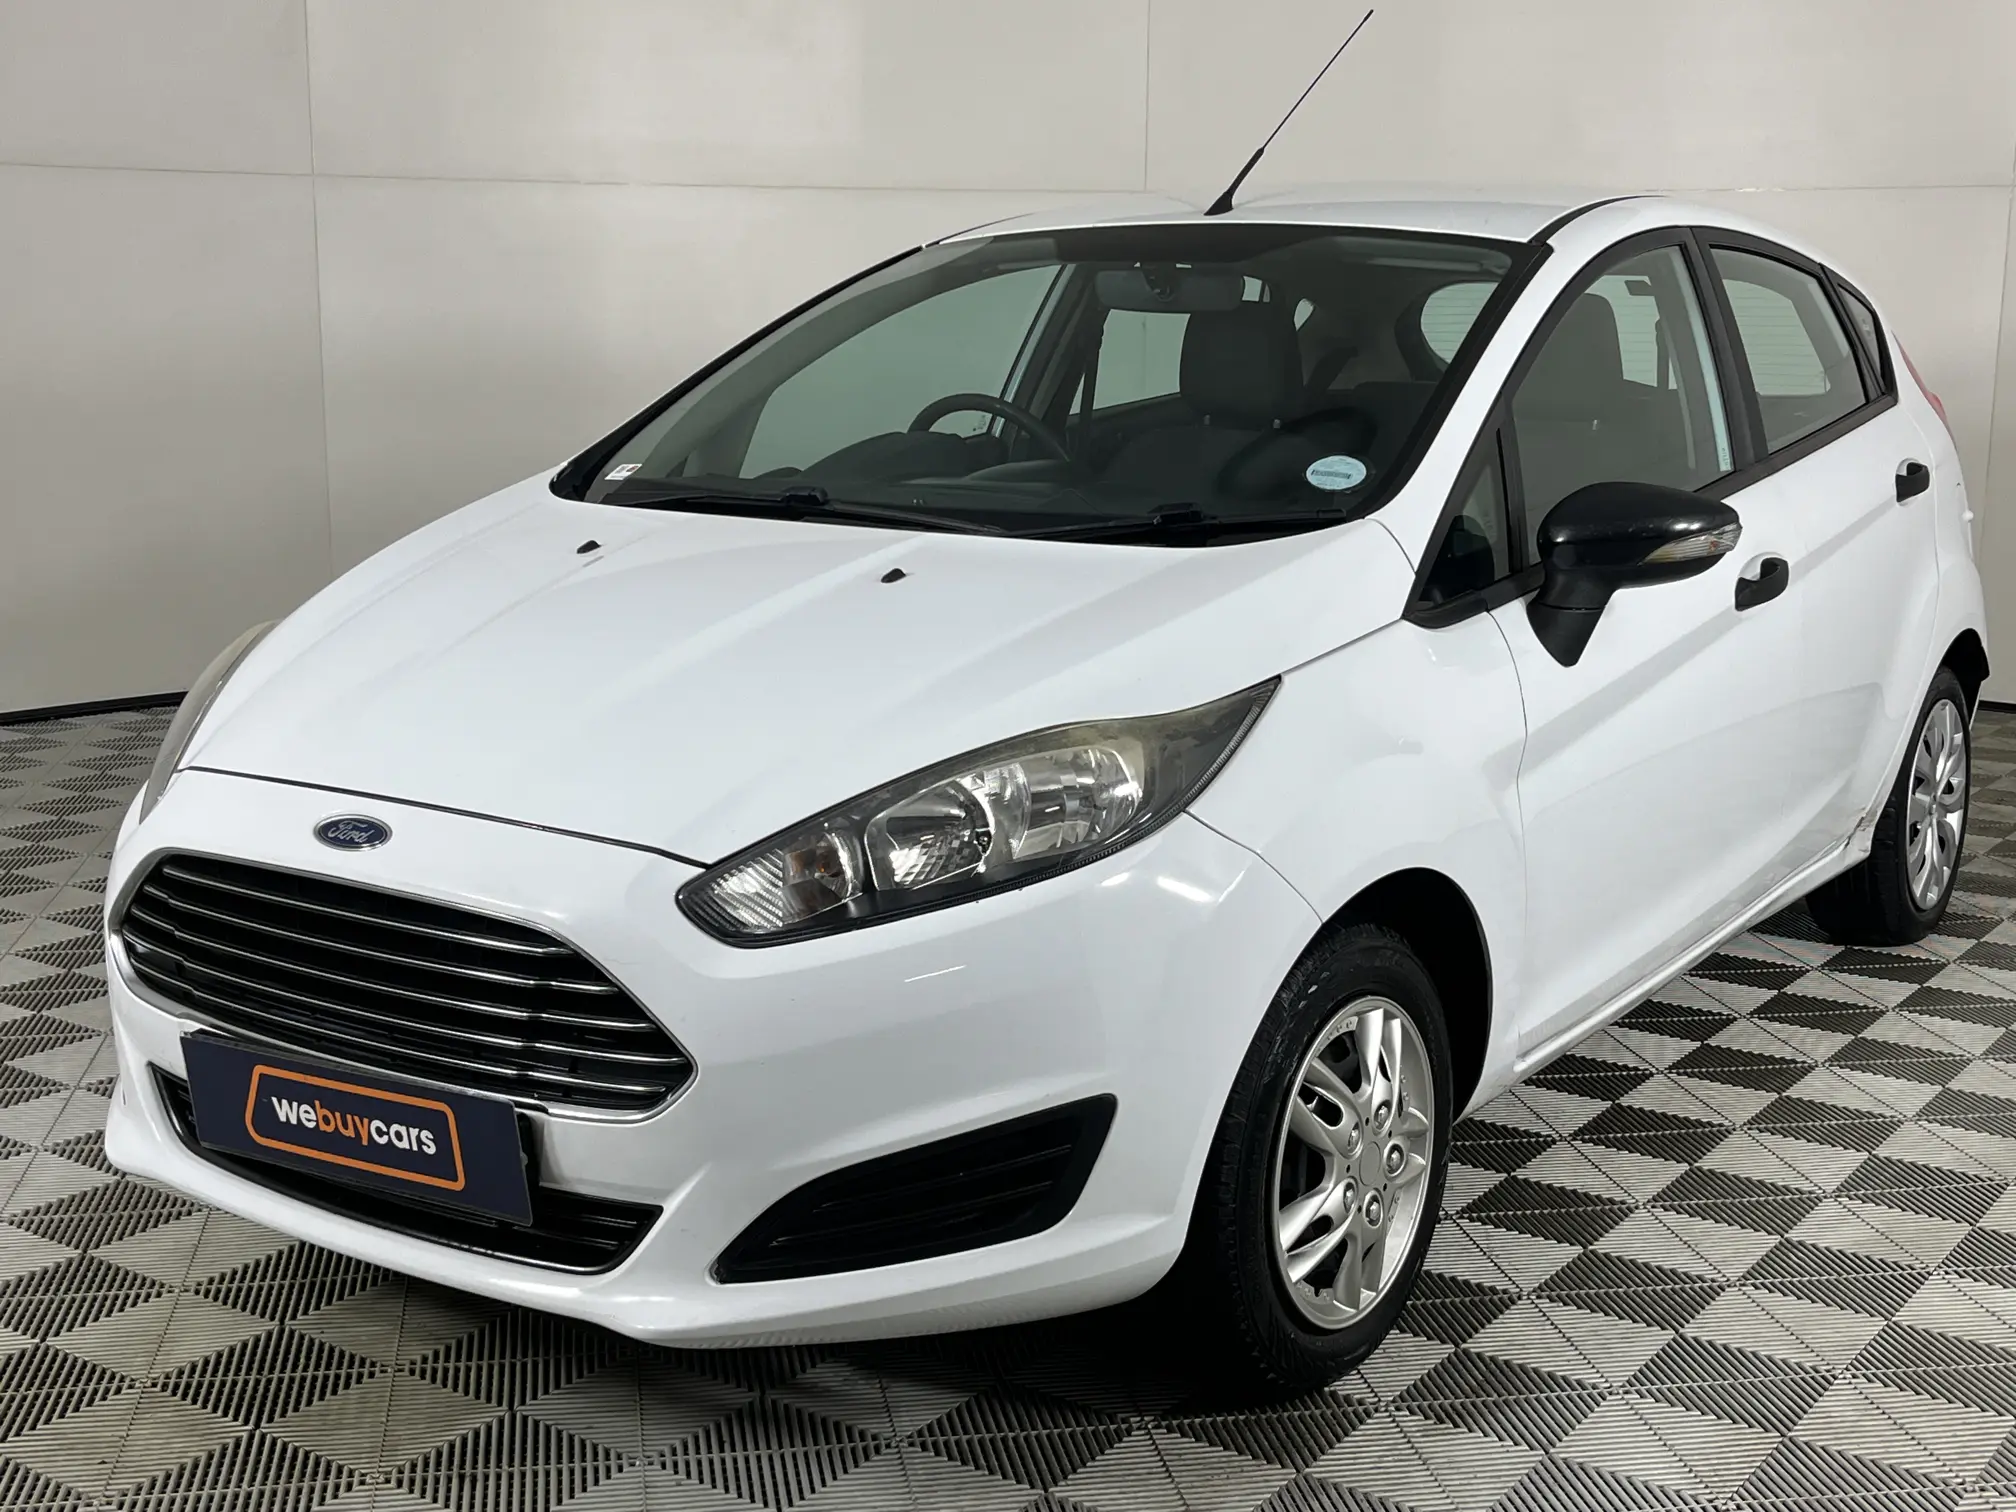 2014 Ford Fiesta 1.4 Ambiente 5 DR